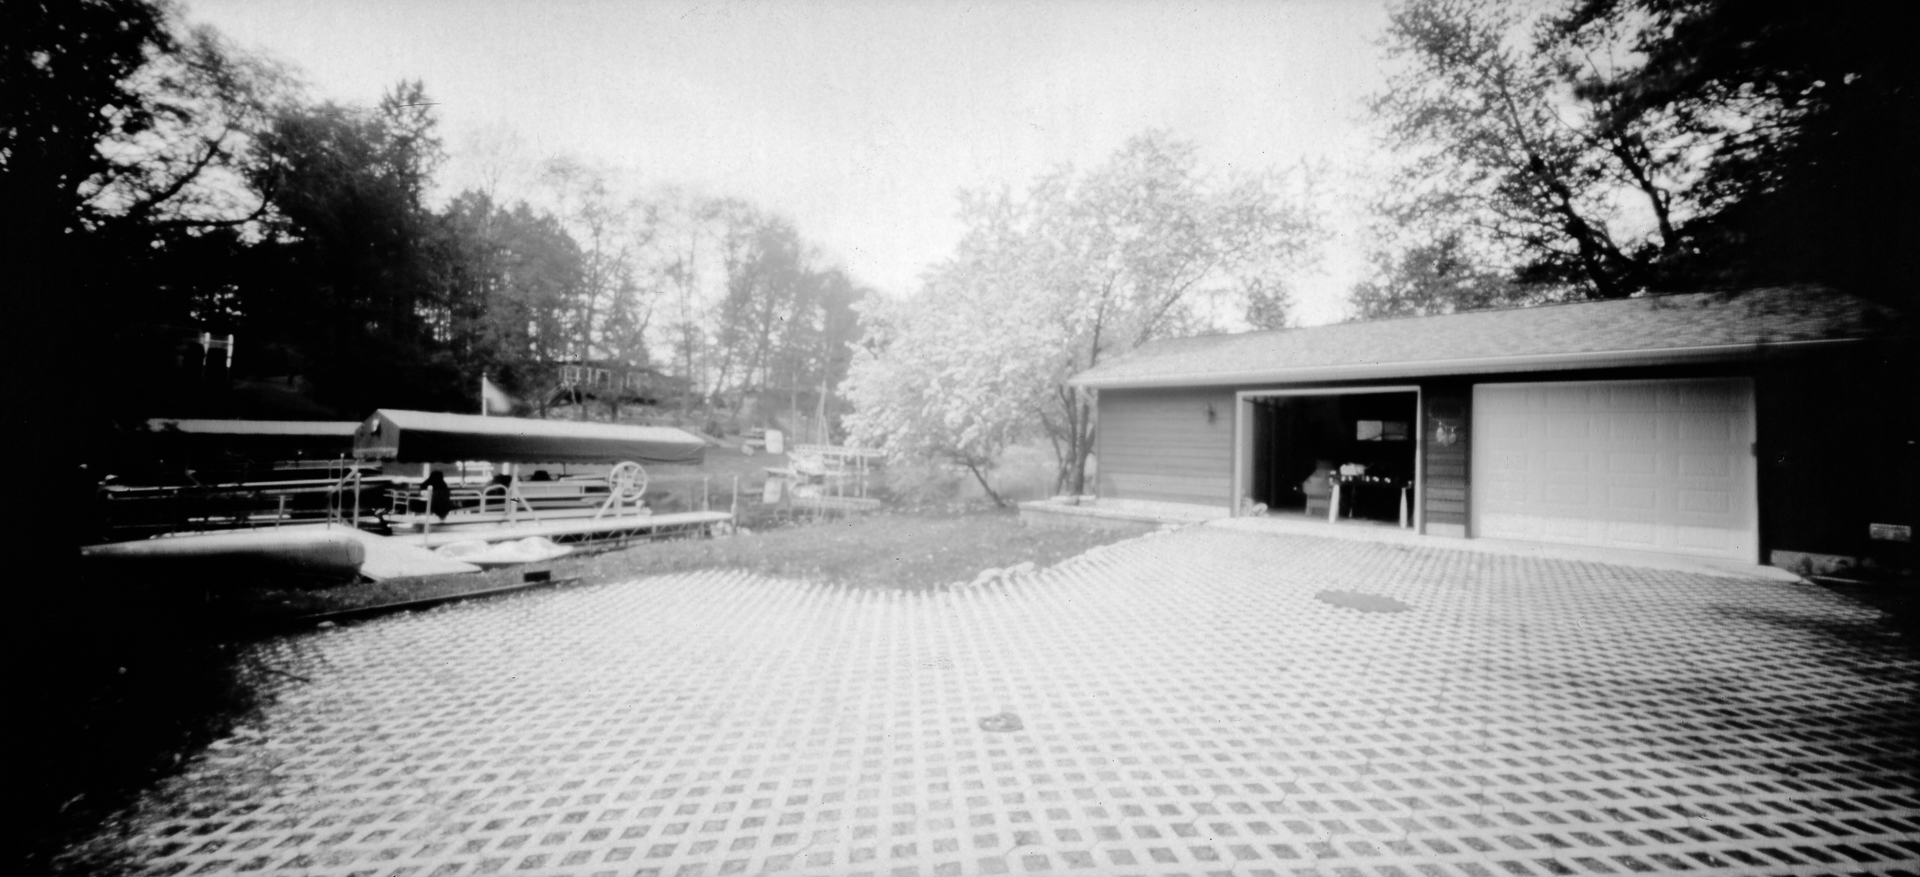 2020-05-24 - Pontoon and Garage - Taken with Holga Wide Pinhole Camera and on Seagull VC-FB pa...jpg